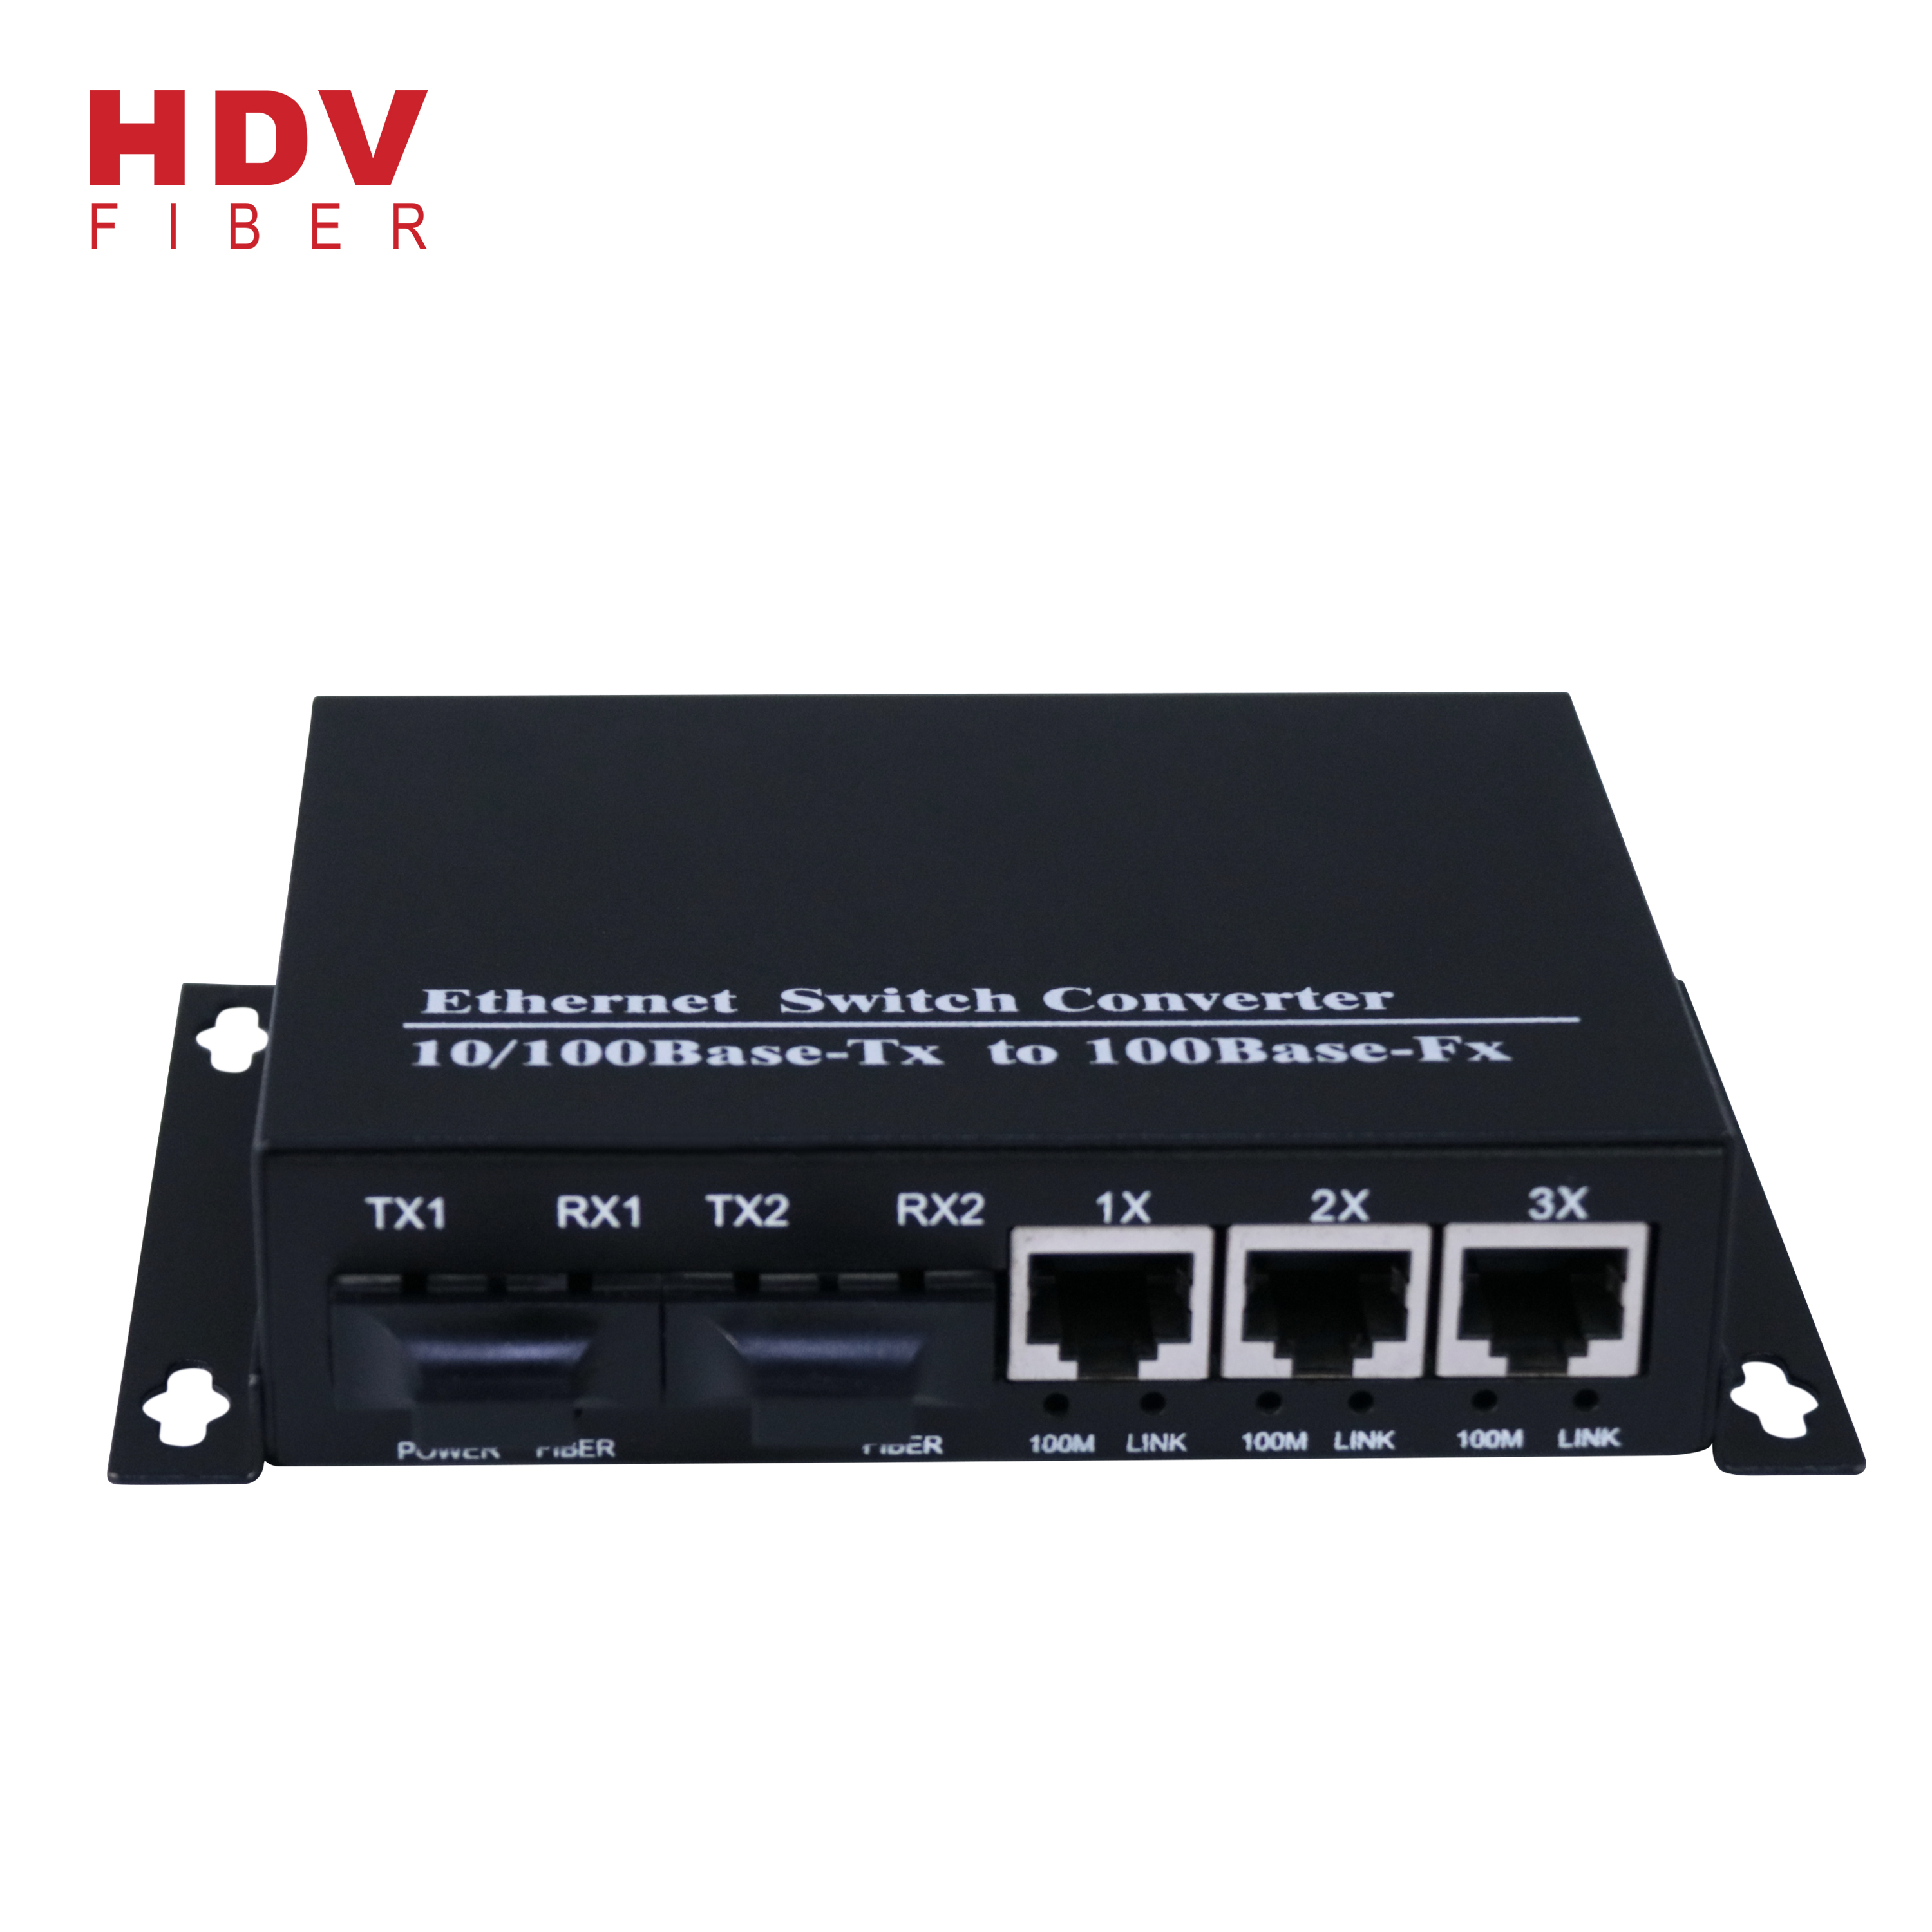 New Model Dual Fiber Compatible Huawei Industrial 3 Port Ethernet Switch Featured Image